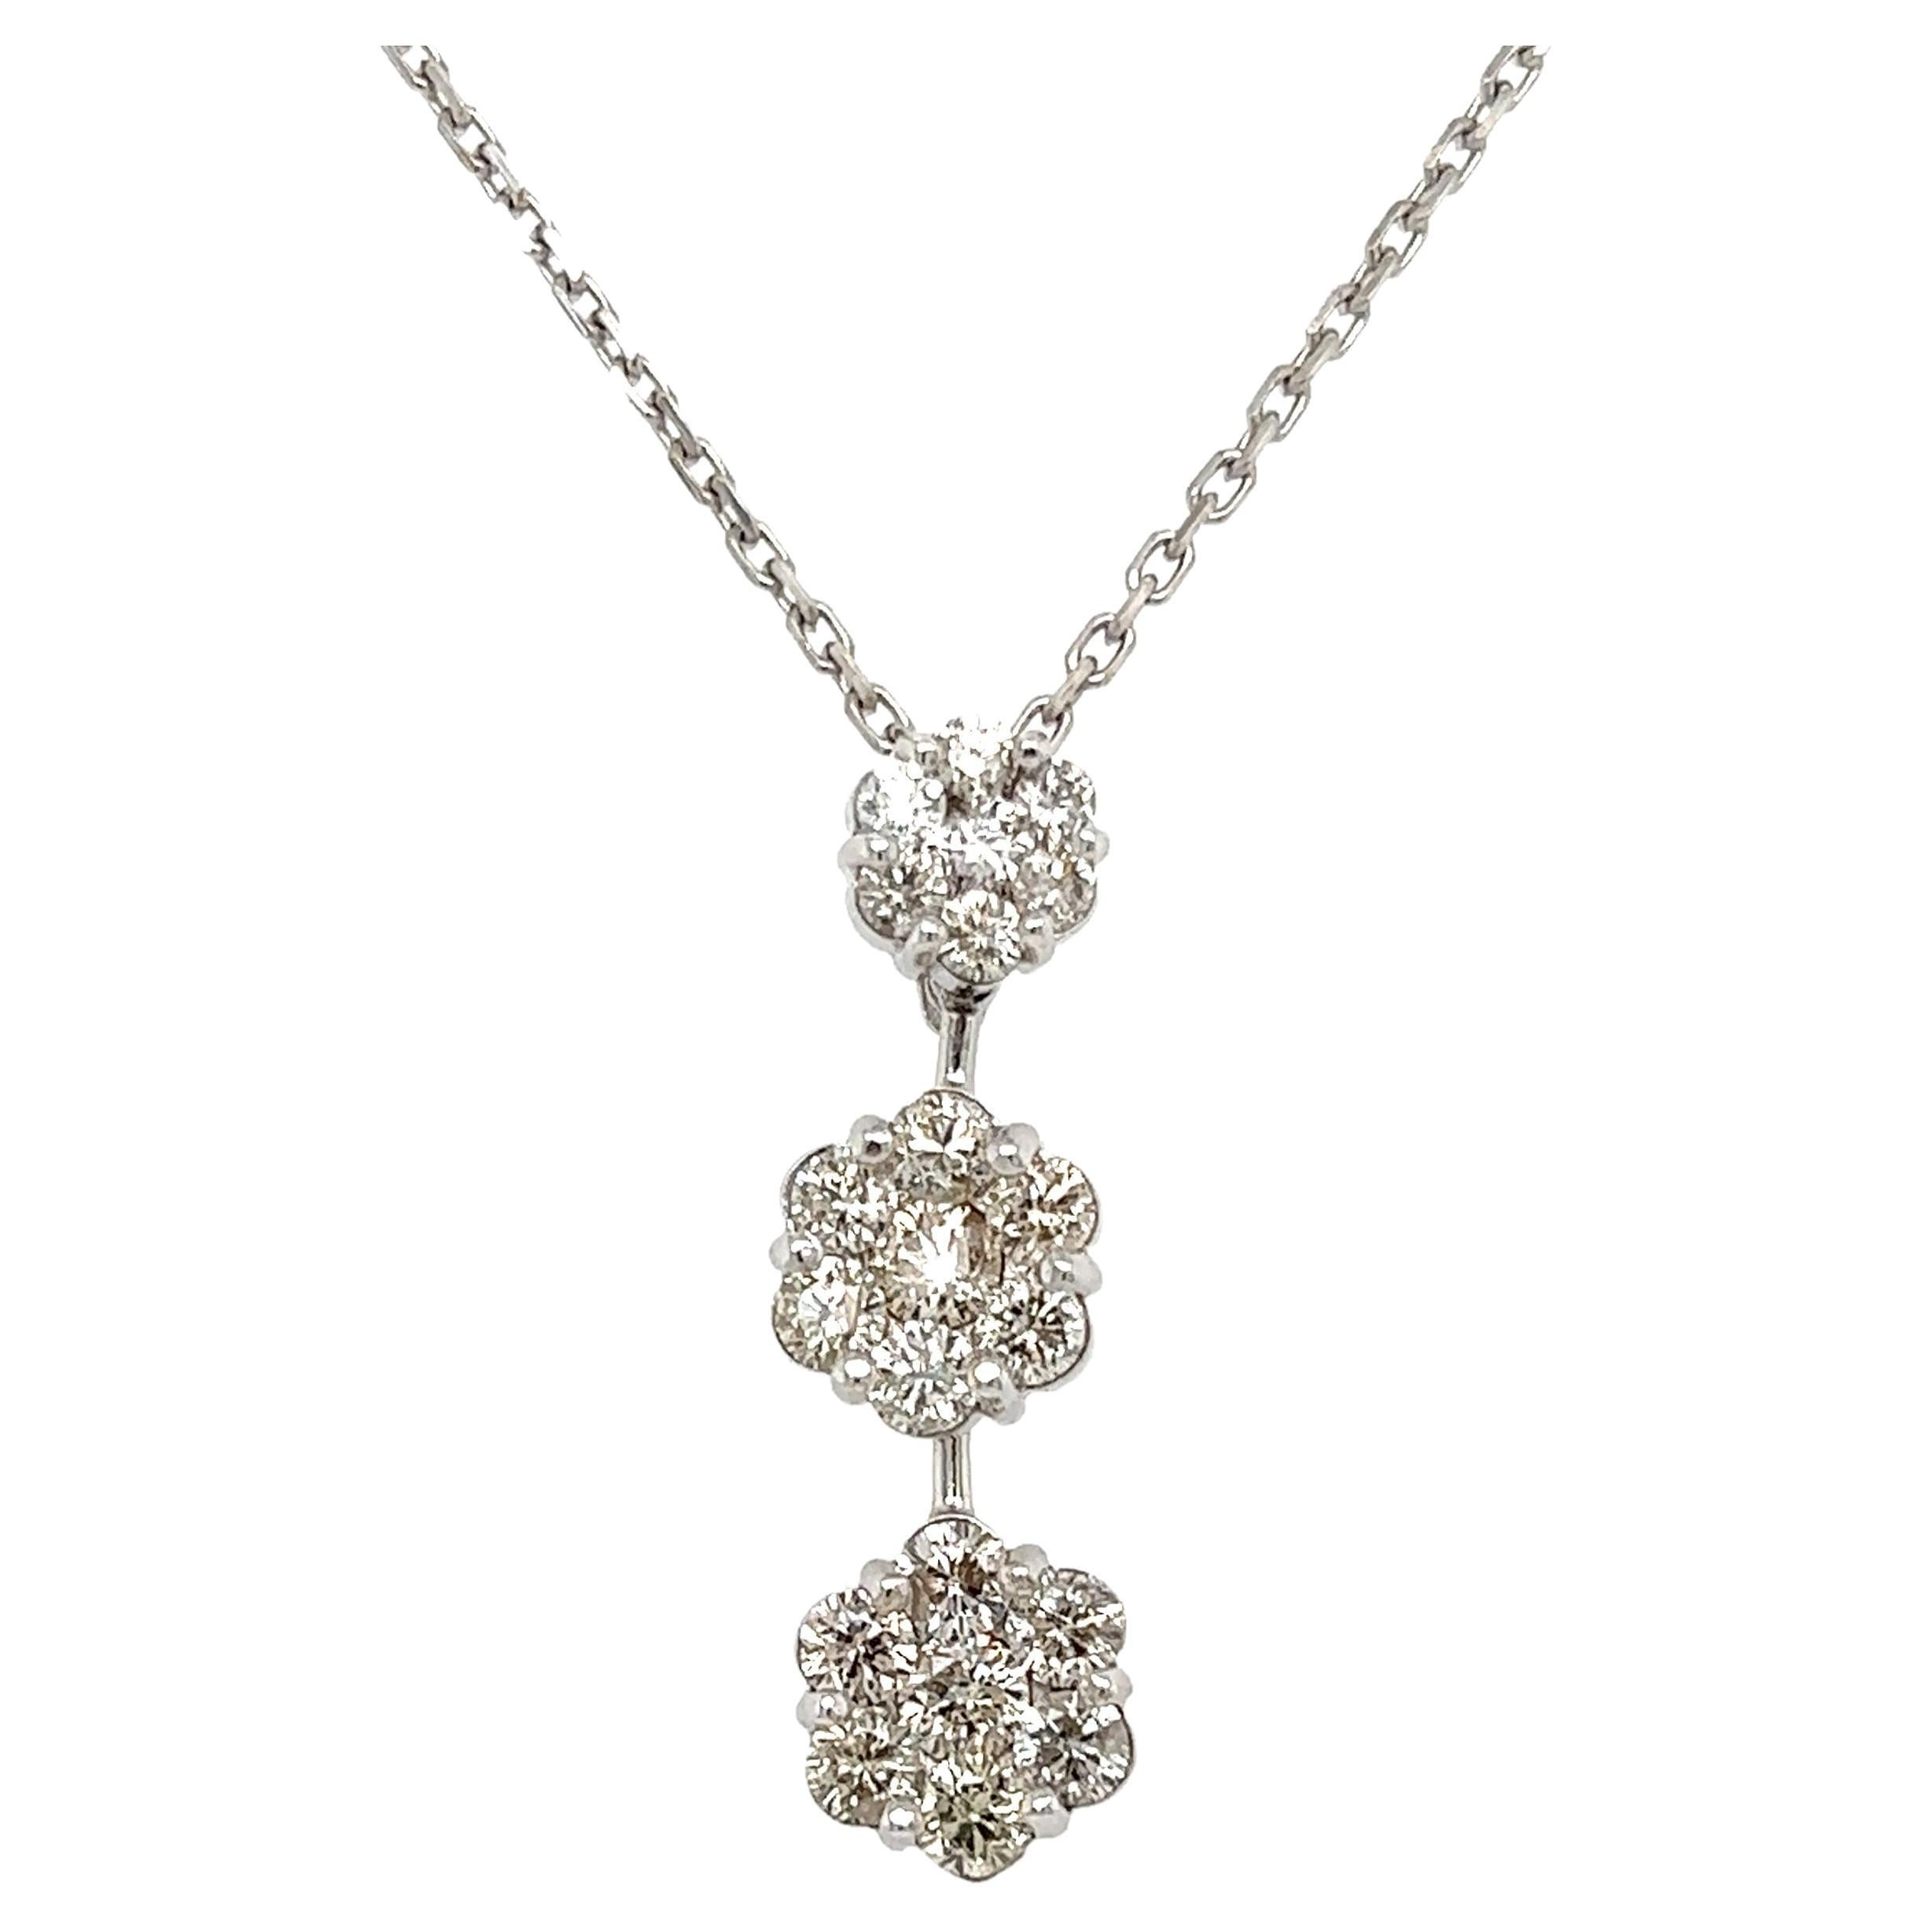 Diamond Cluster Flower Drop Necklace For Sale At 1stdibs 